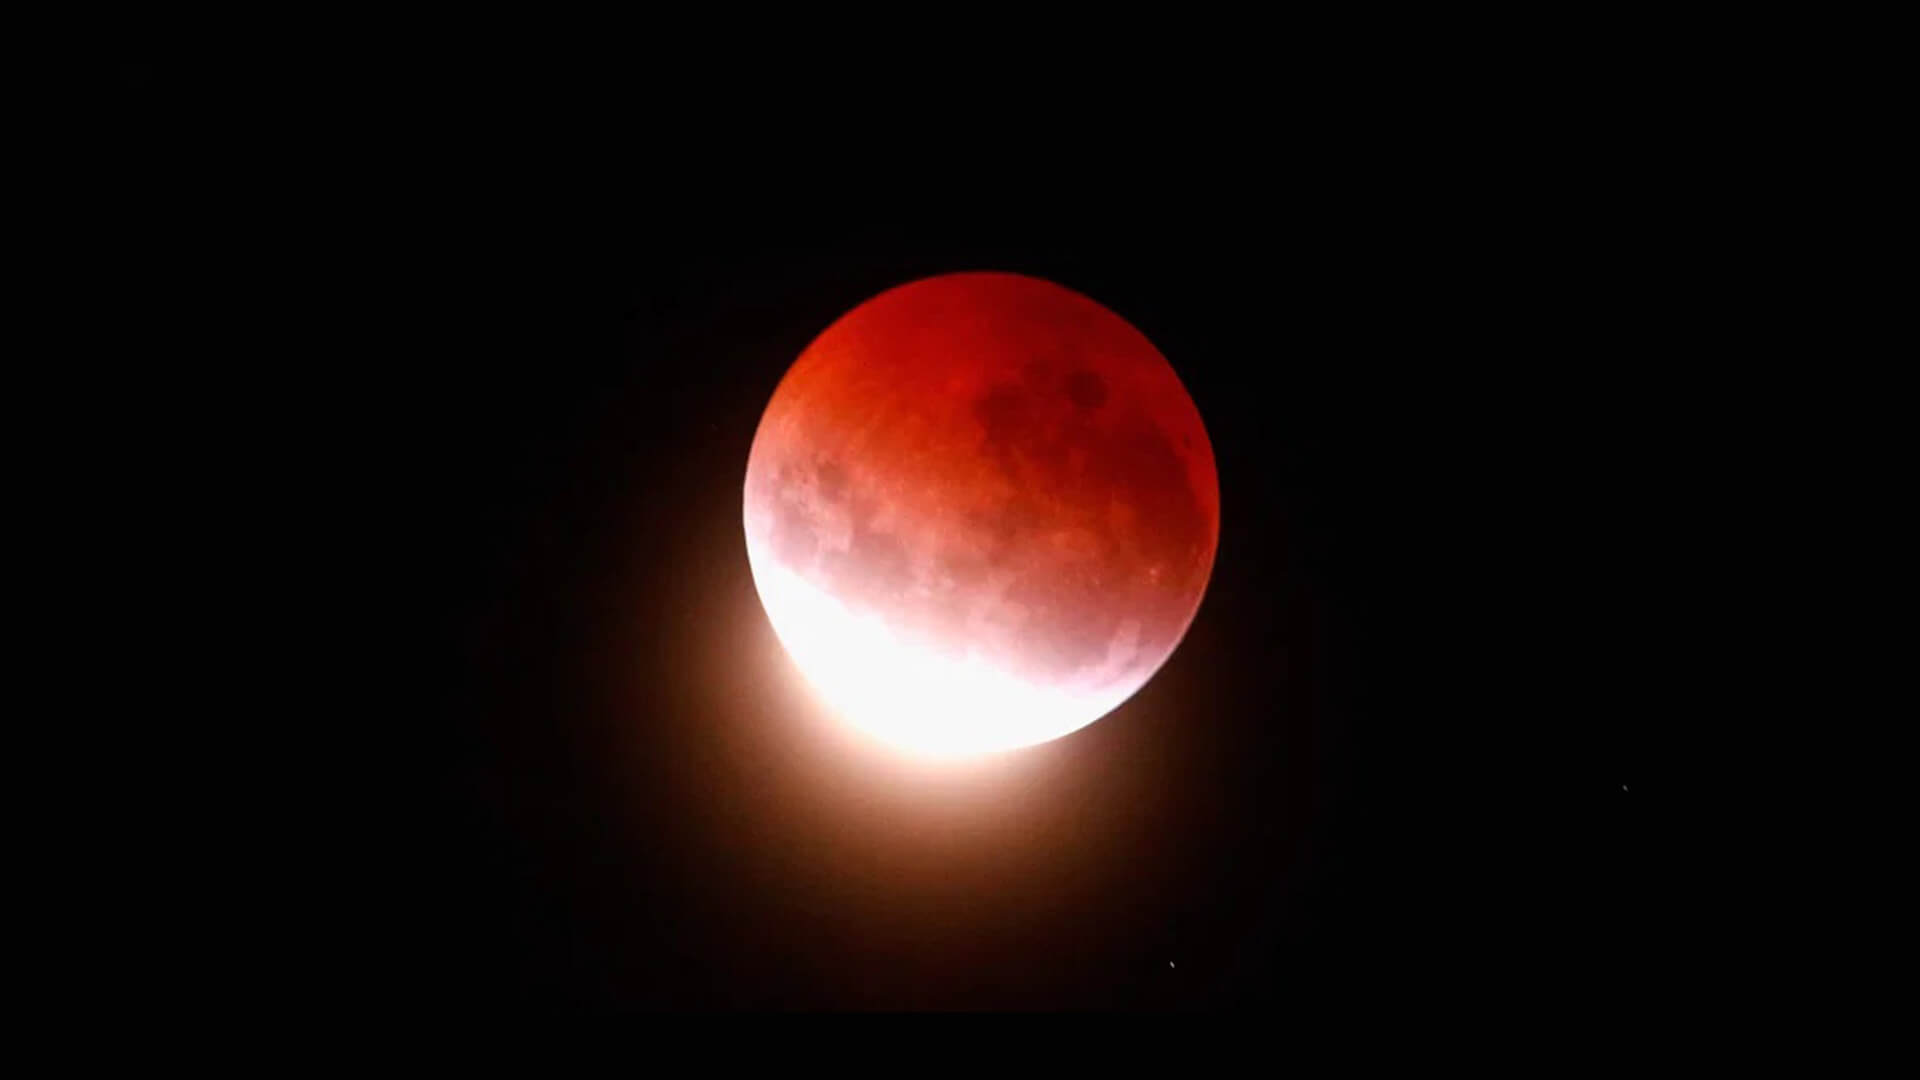 article Strawberry Full Moon Lunar Eclipse – June 5th 2020